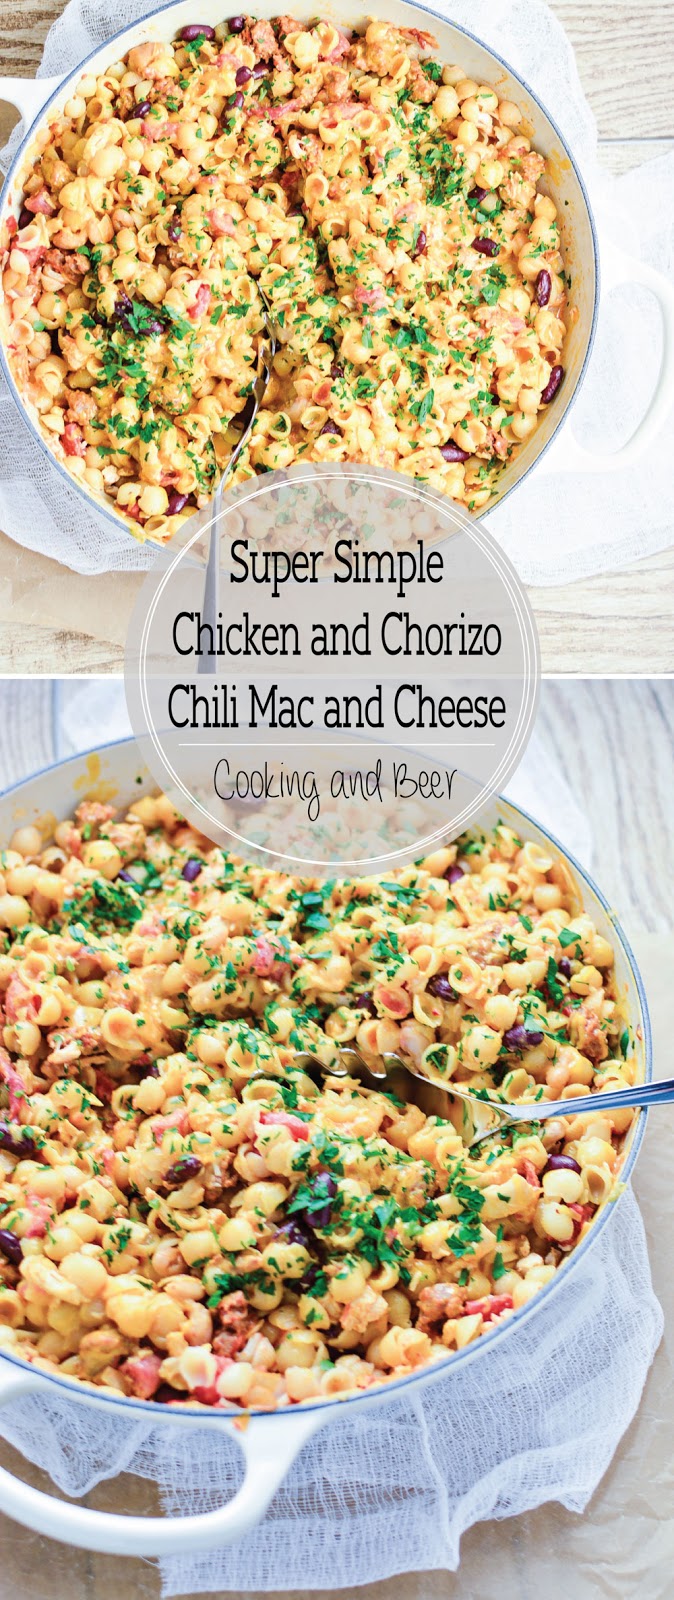 Super Simple Chicken and Chorizo Chili Mac and Cheese #Recipe - Cooking ...